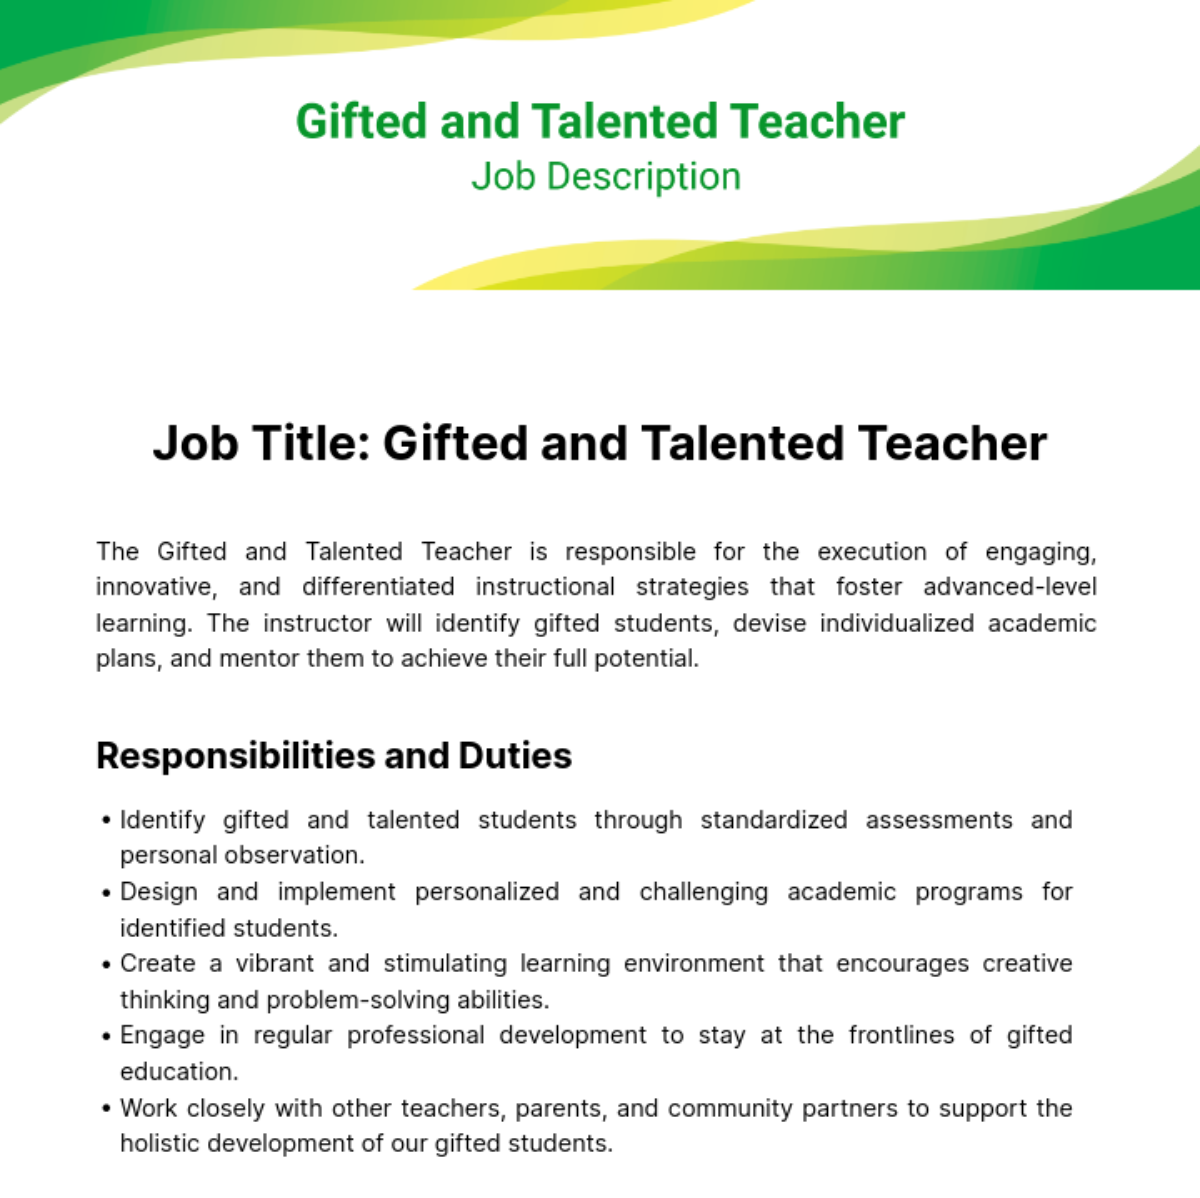 Free Gifted and Talented Teacher Job Description Template